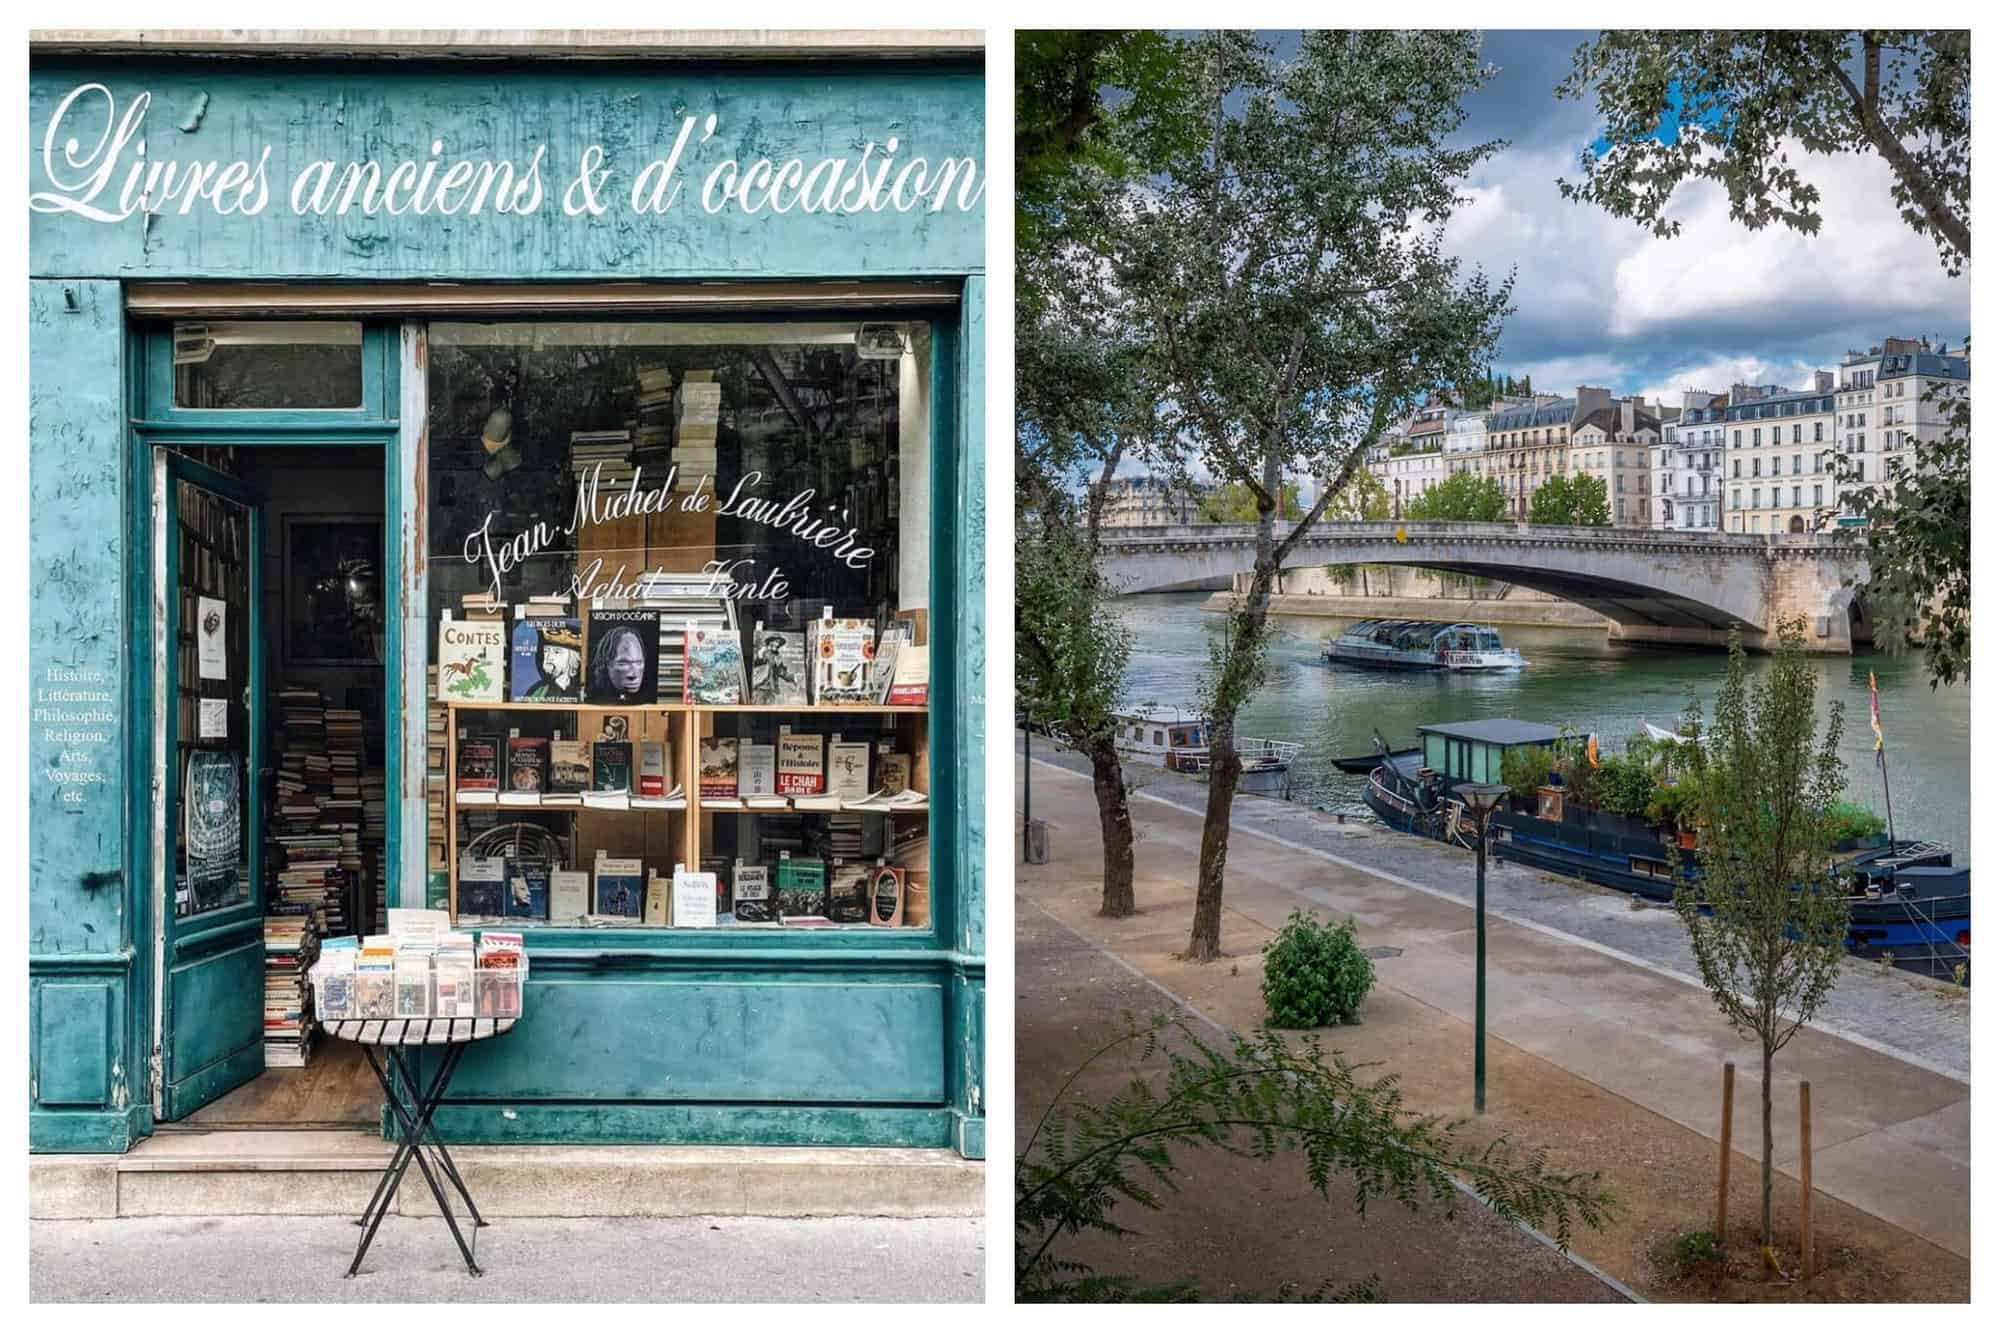 Left: a photo of a blue book store in Paris named Livres Anciens and d'occasion with the entrance door open. Right: a photo of the Seine on a cloudy day in Paris/ Several boats can be seen however no people. 